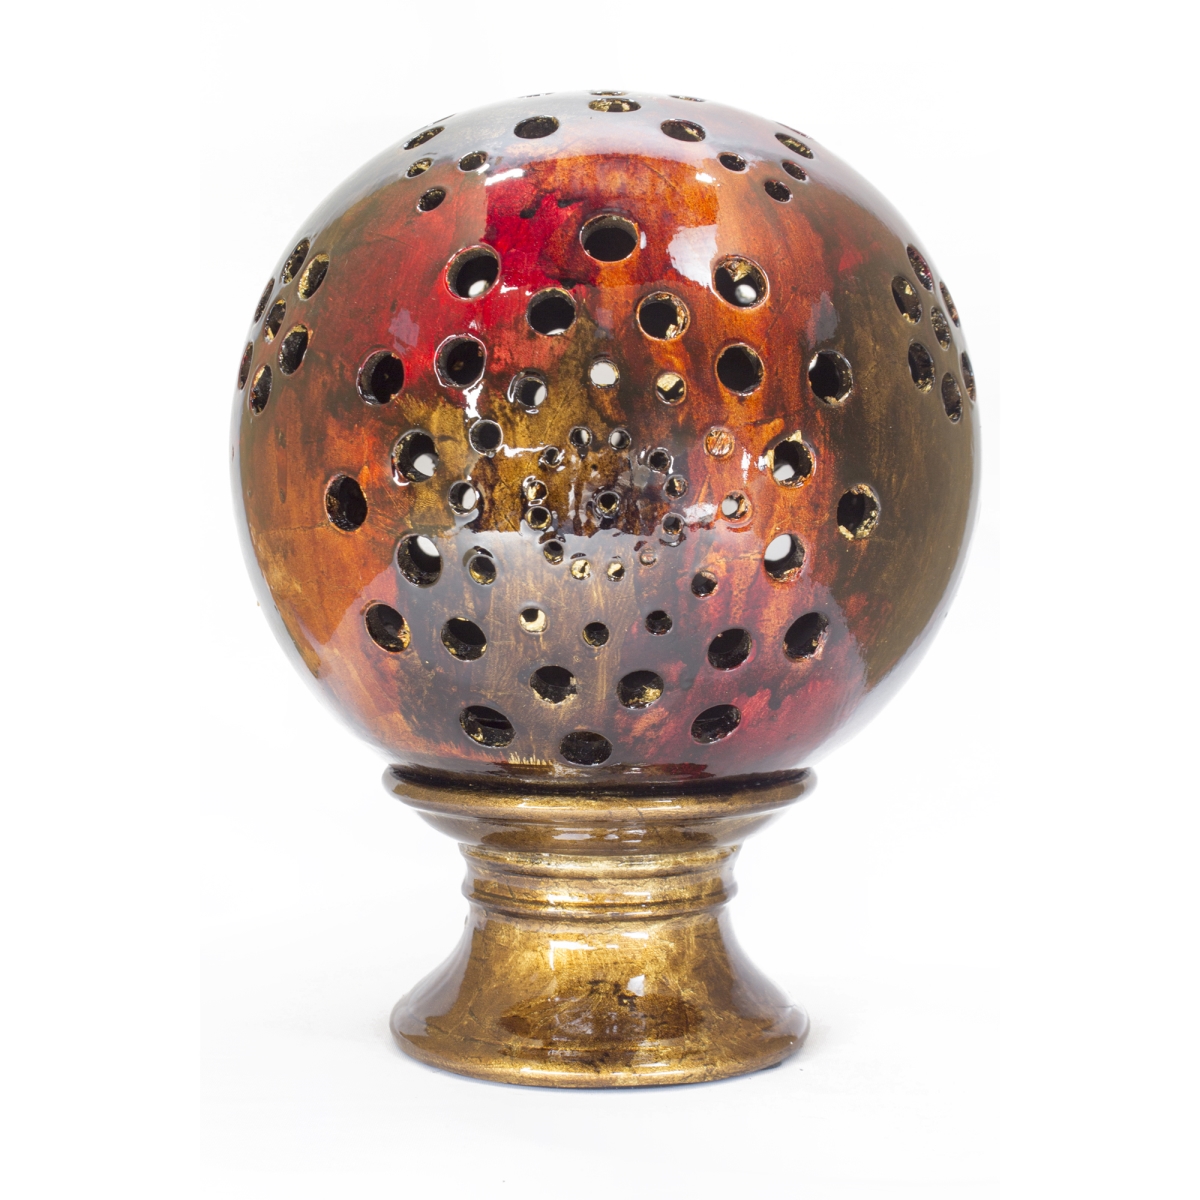 W071523-06 Glow Foiled & Lacquered Ceramic Globe Candleholder